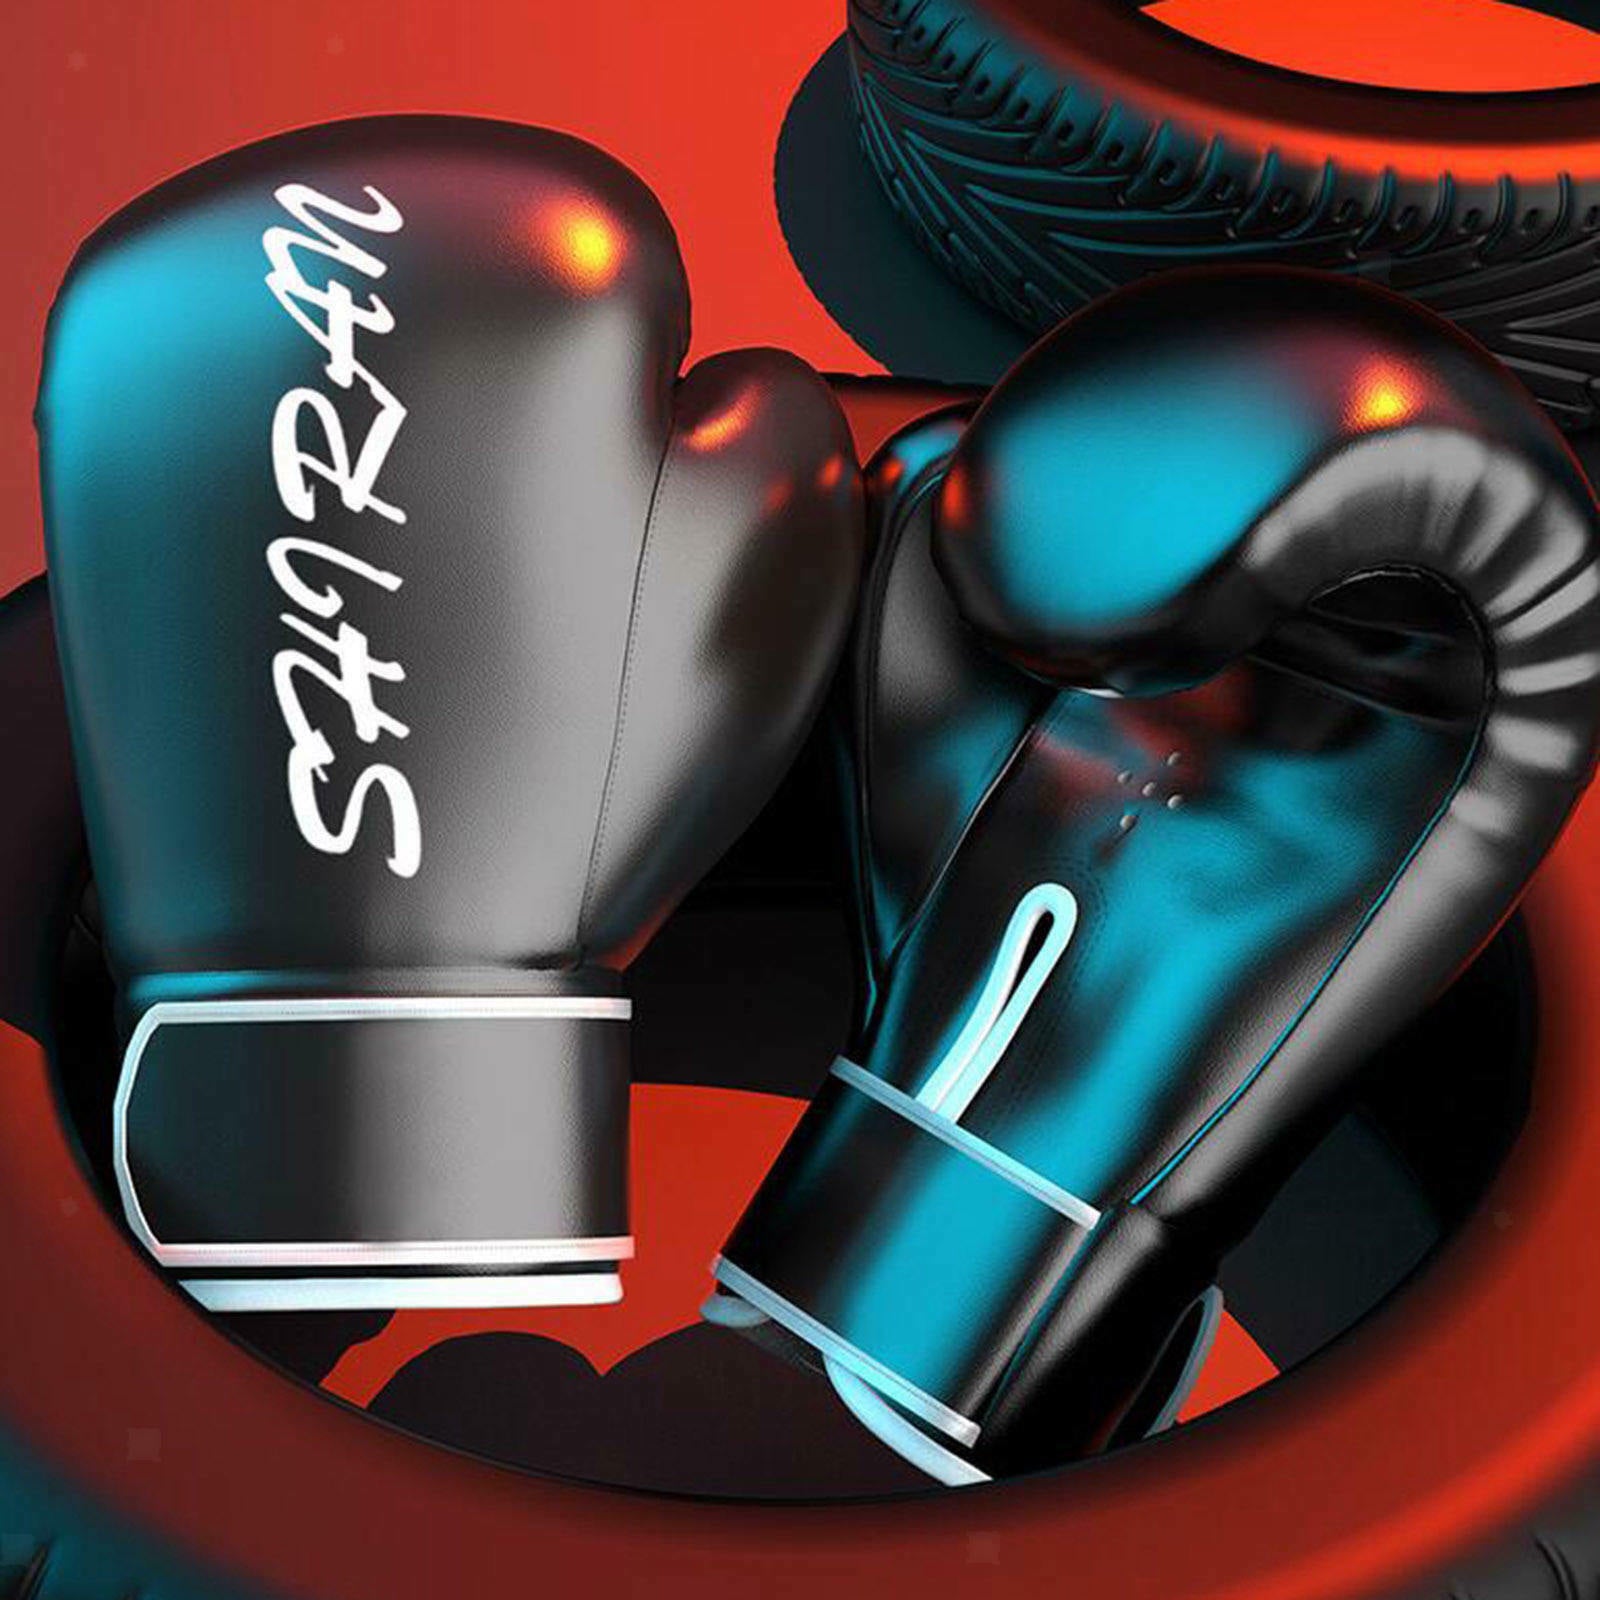 2 Pair Professional Boxing Training Gloves Sparring Fight Punching 10oz